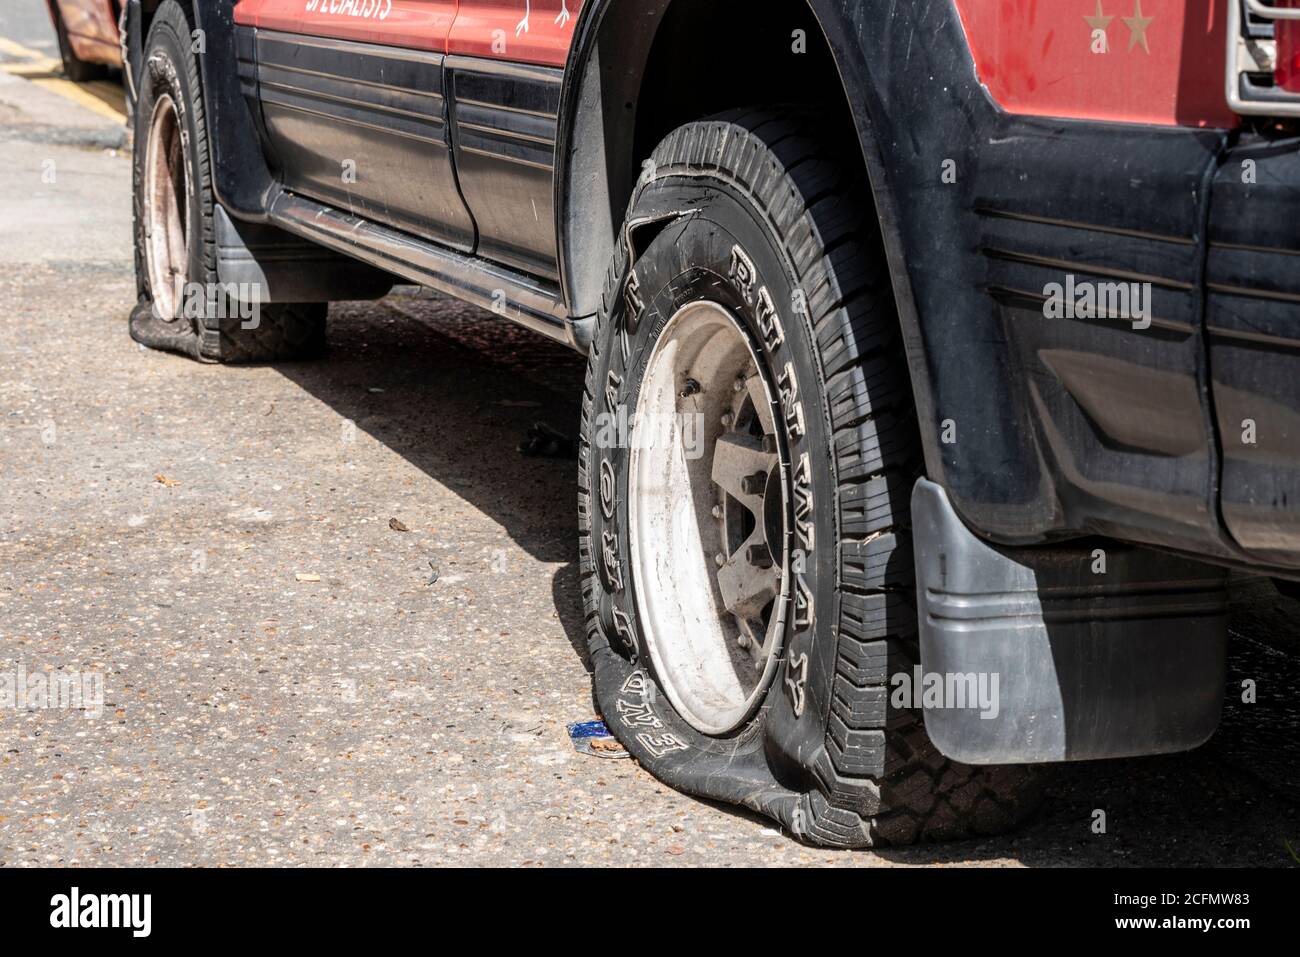 Slashed car tyres on a 4x4 vehicle. Expensive tires vandalised on car. Chunky all terrain tyres slashed in street. Authentic criminal action on road Stock Photo